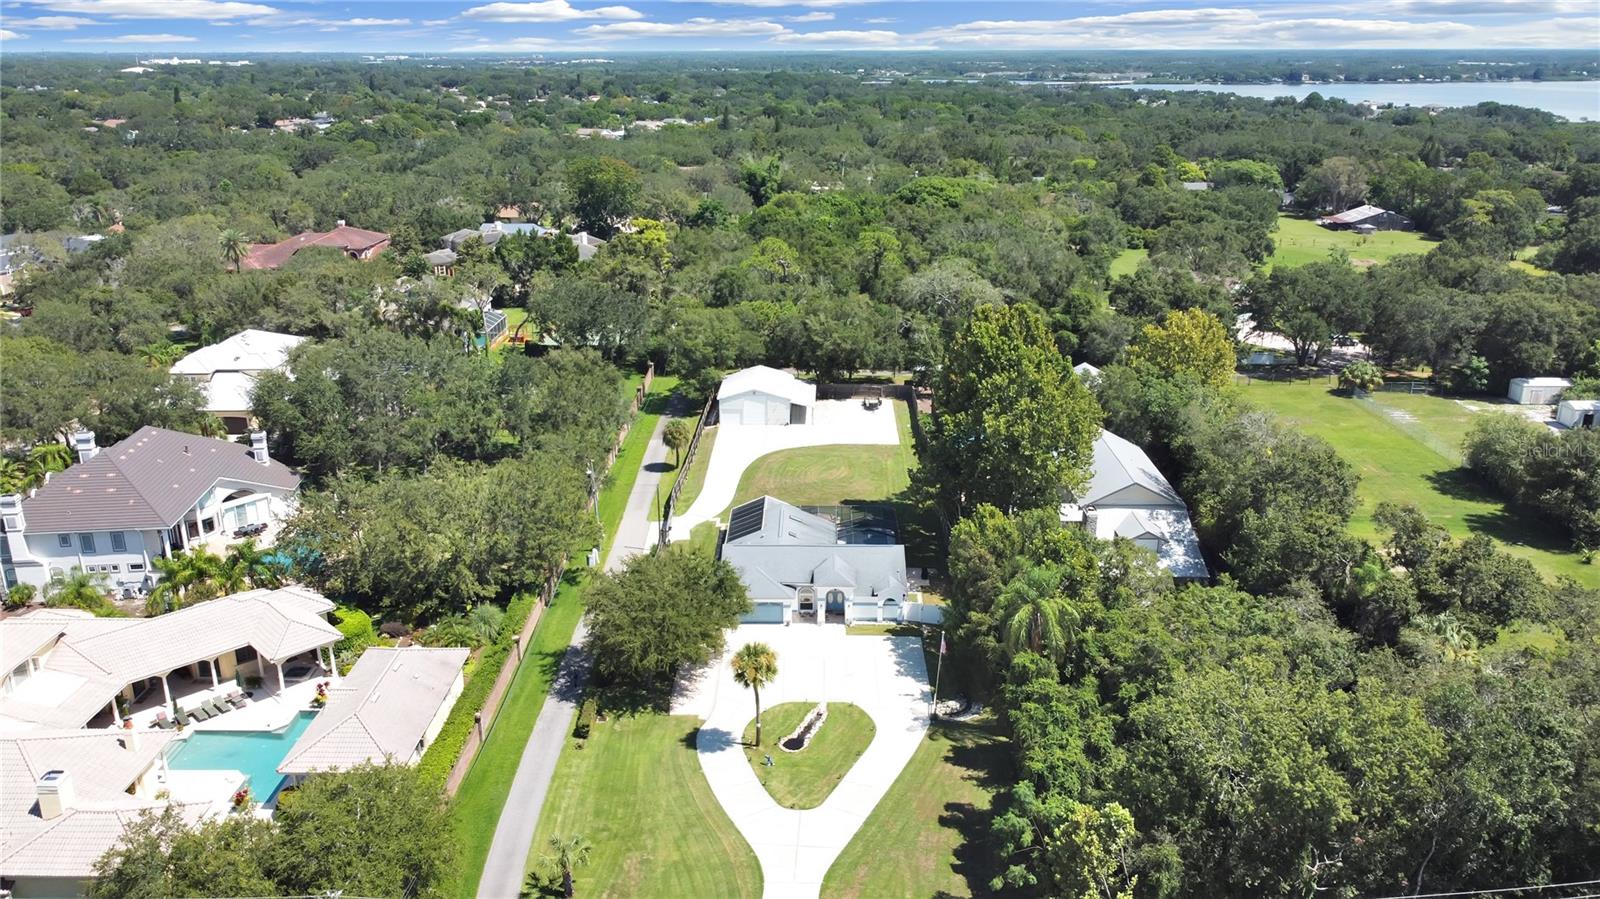 Aerial view of 3500 Enterprise Road property.